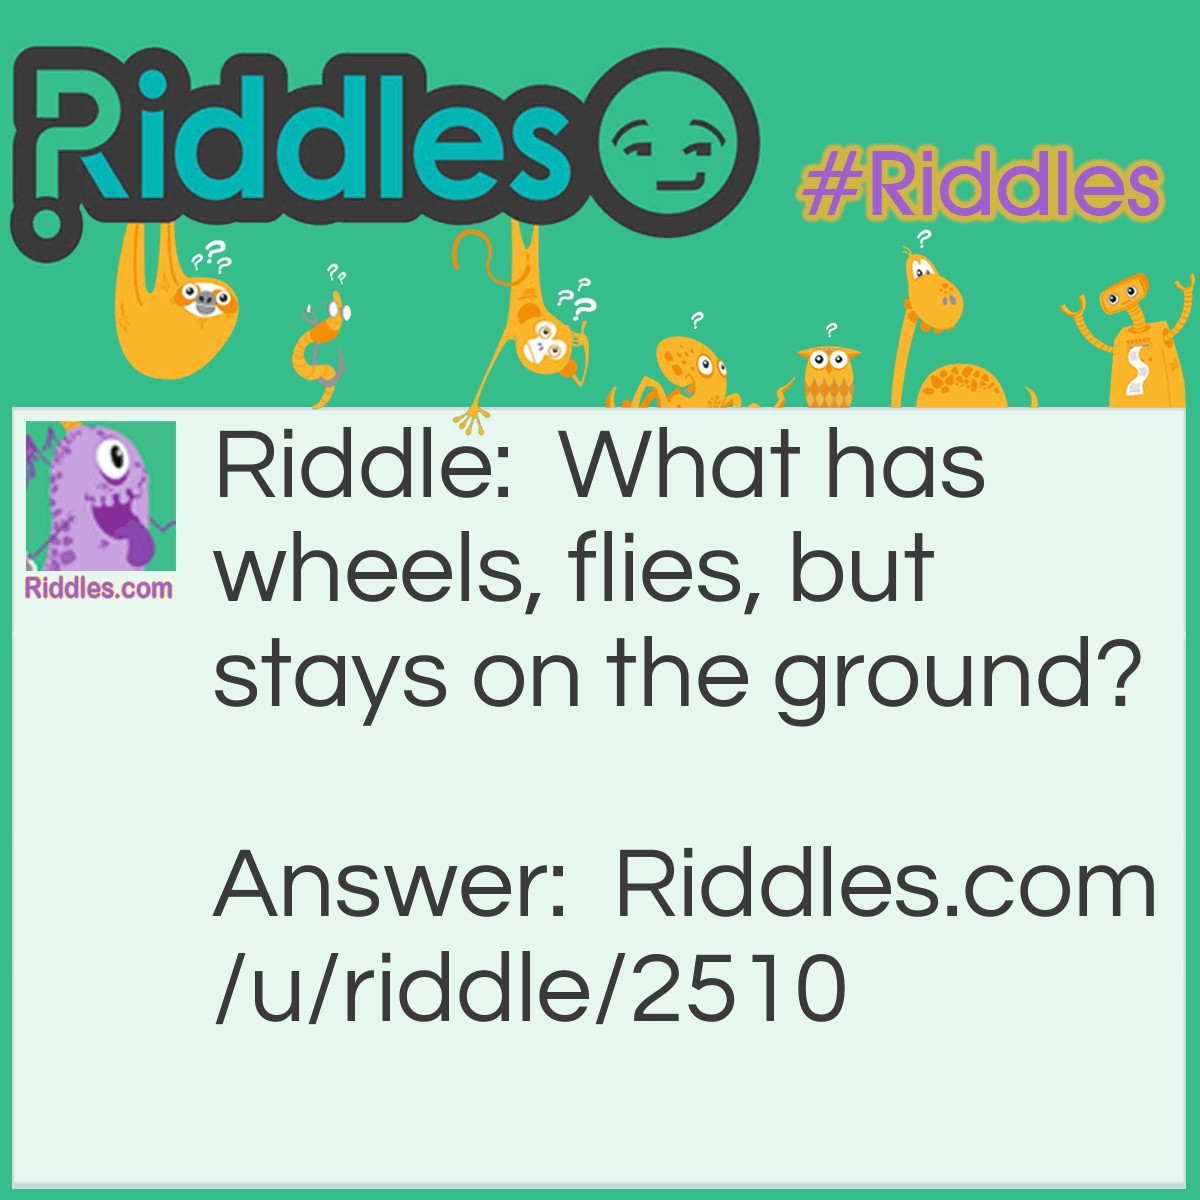 Riddle: What has wheels, flies, but stays on the ground? Answer: A trashtruck!